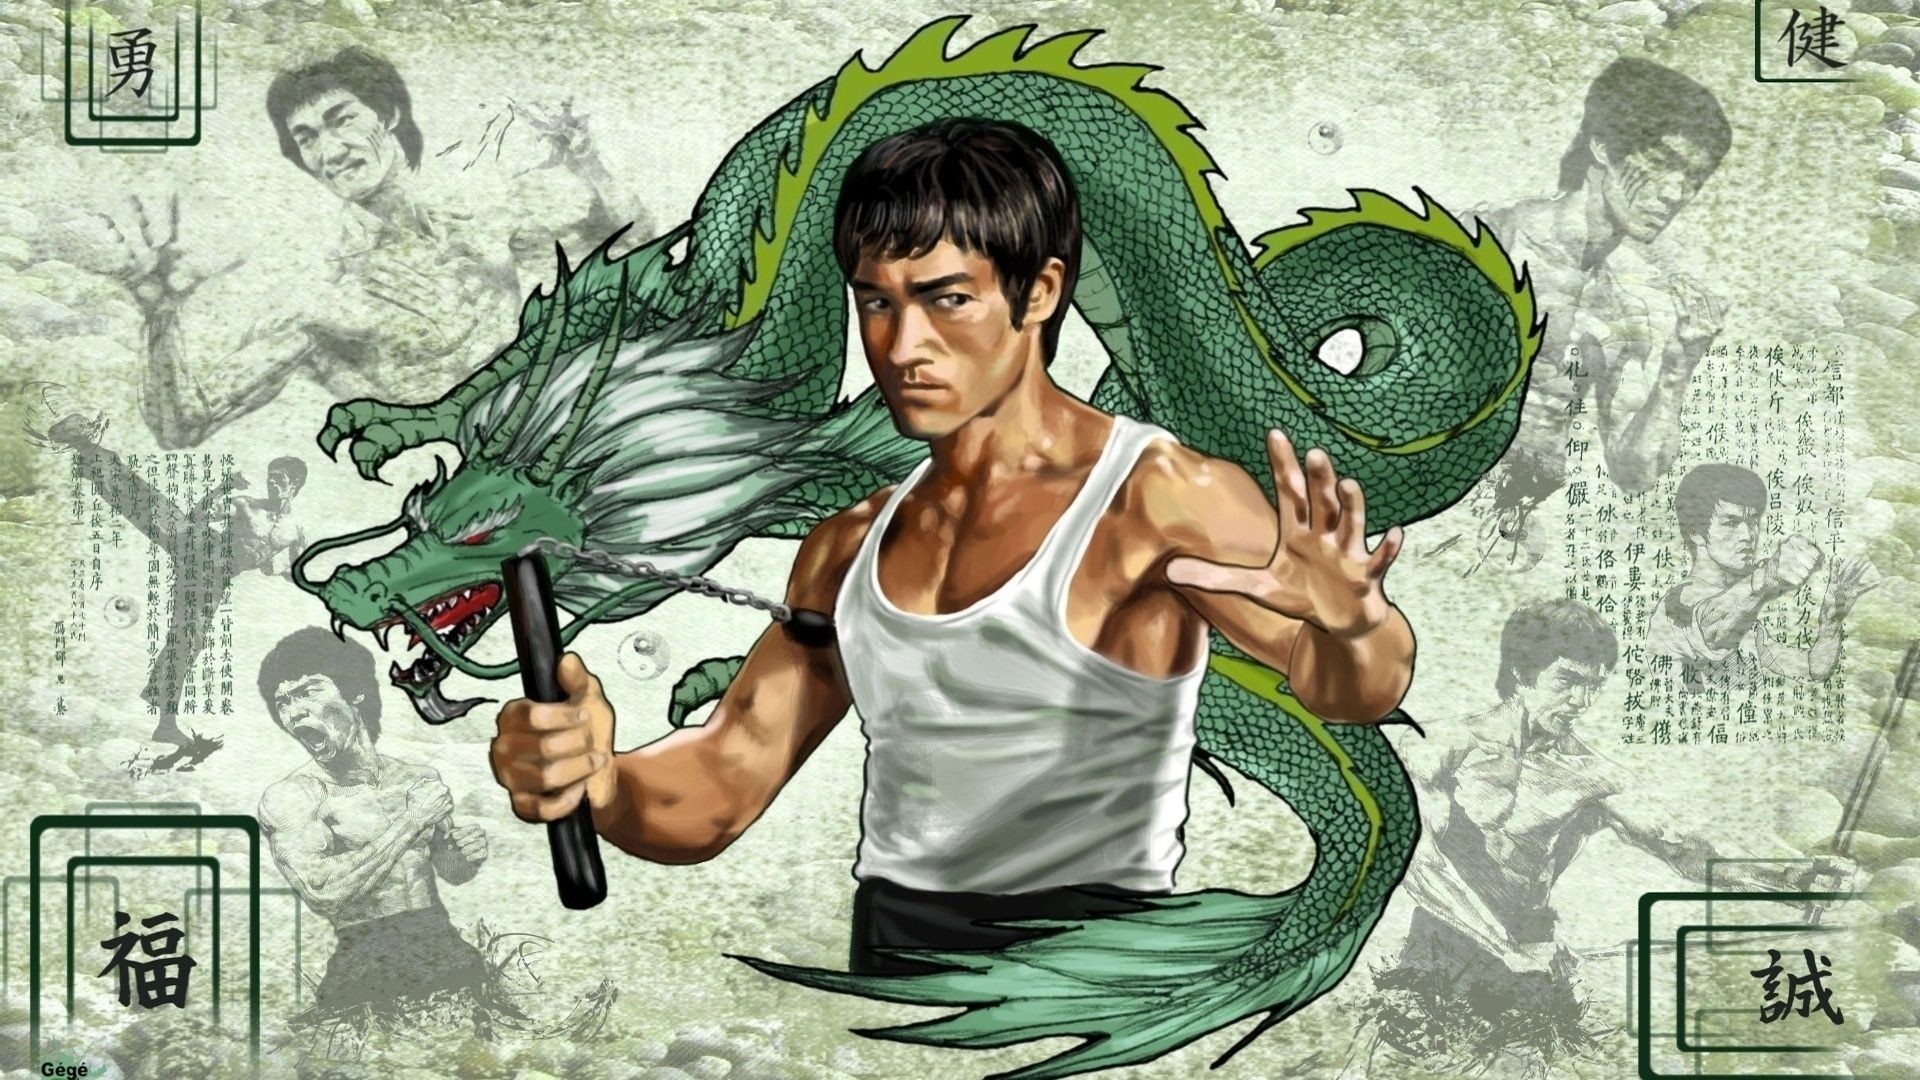 The Way of the Dragon: The iconic martial arts, Renowned for its legendary final showdown between Lee and Chuck Norris. 1920x1080 Full HD Background.